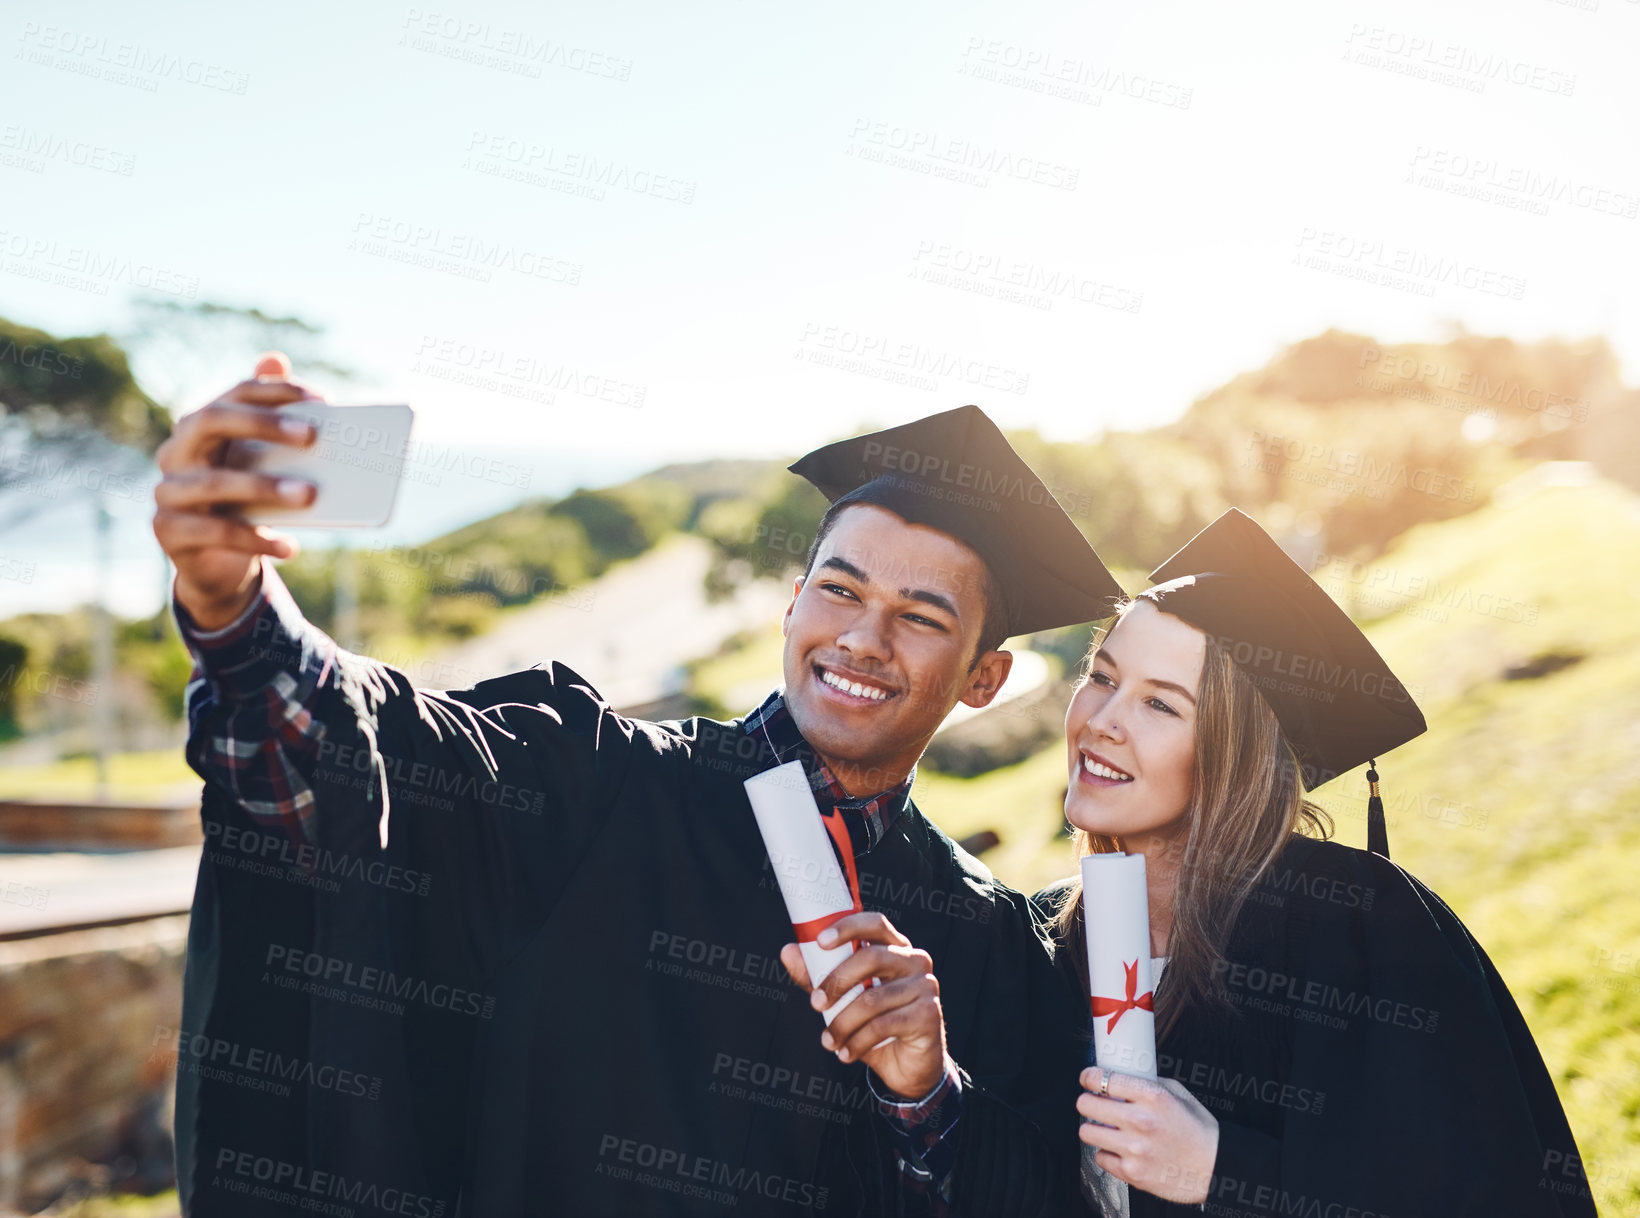 Buy stock photo Cropped shot of two students taking a selfie on graduation day